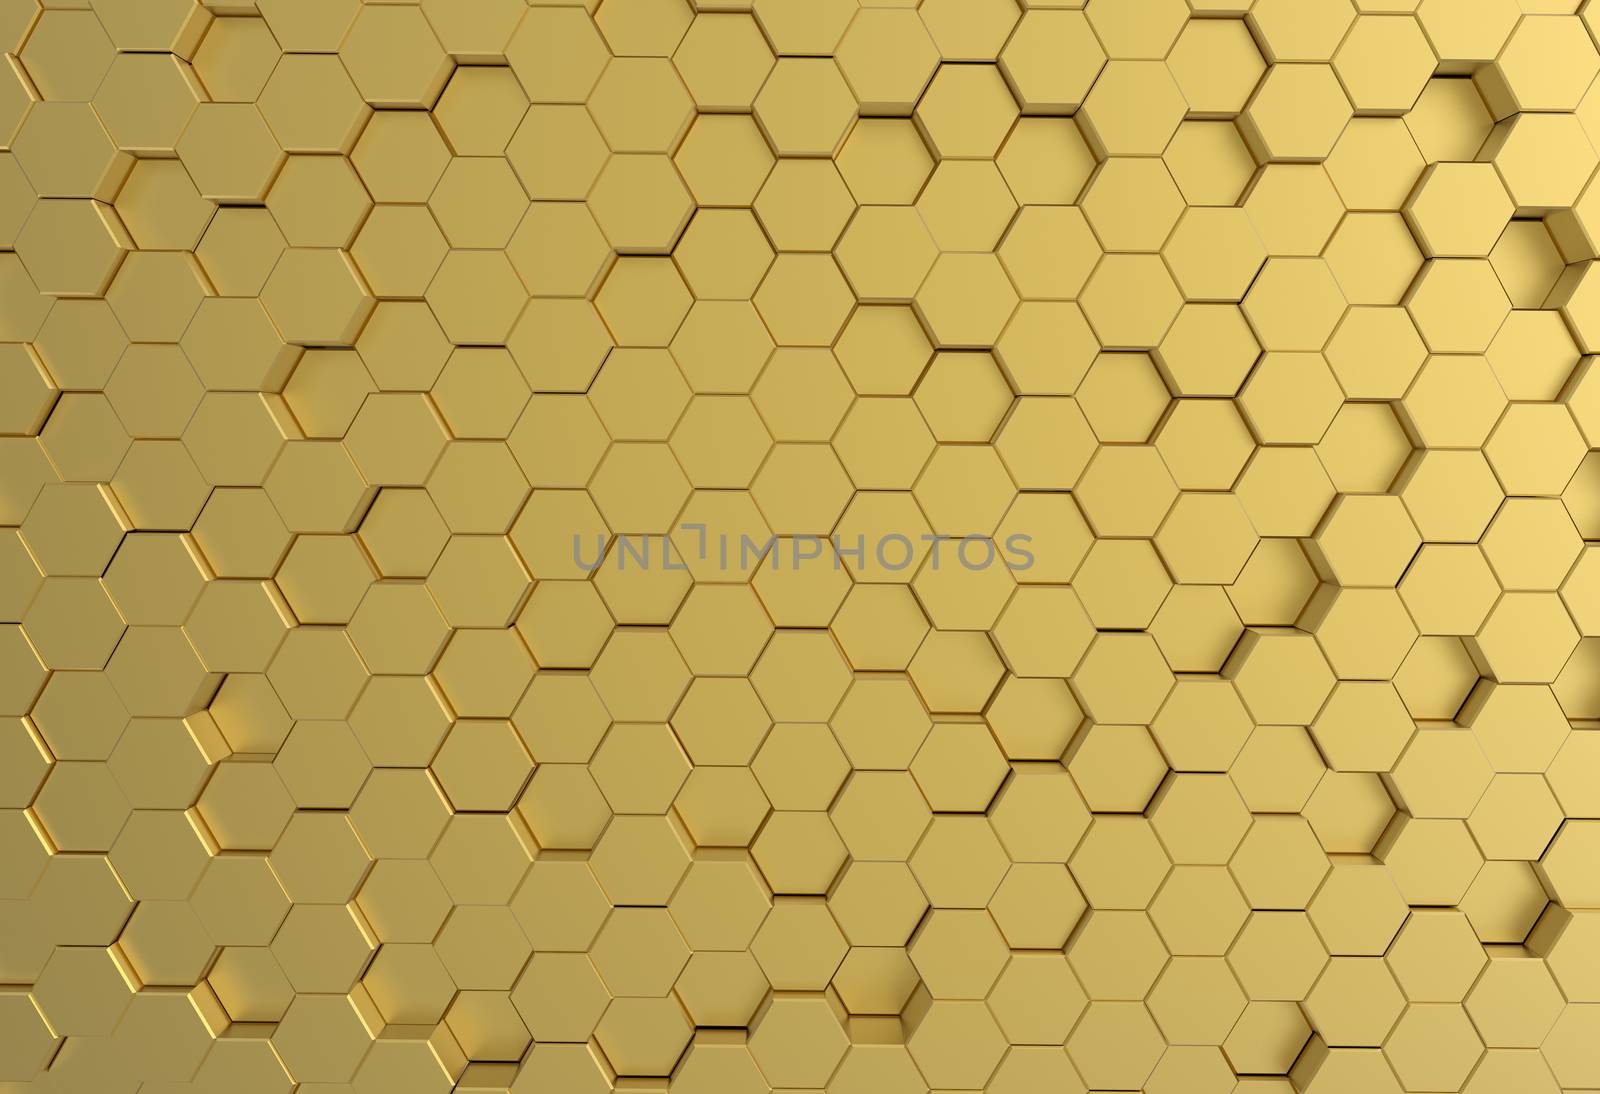 Gold pentagon metal plate background or texture